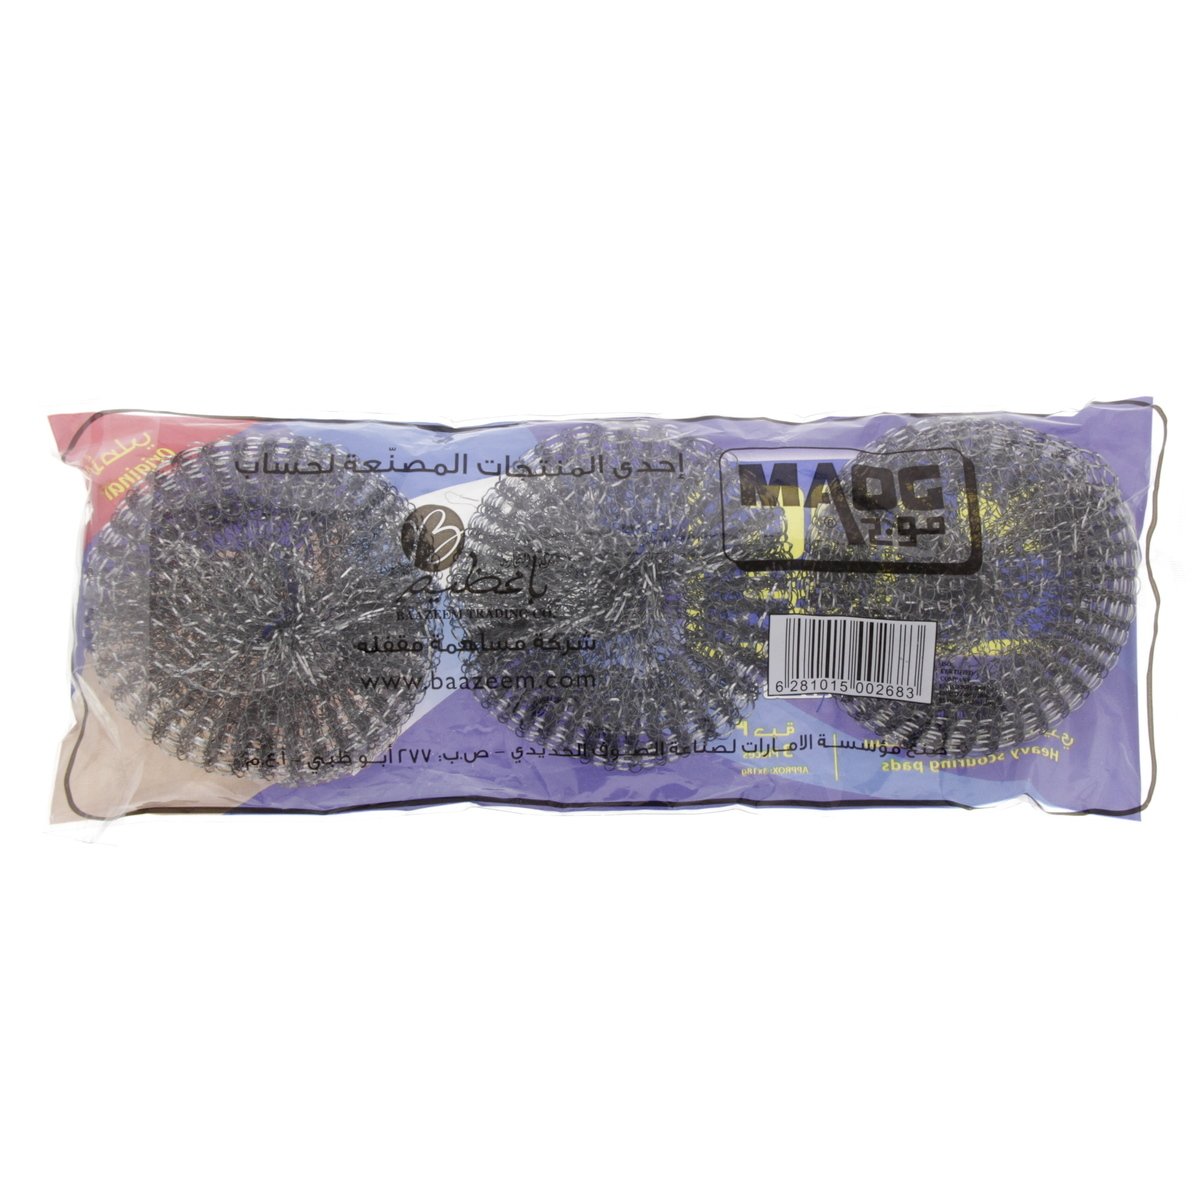 Maog Heavy Scouring Pads 3pcs